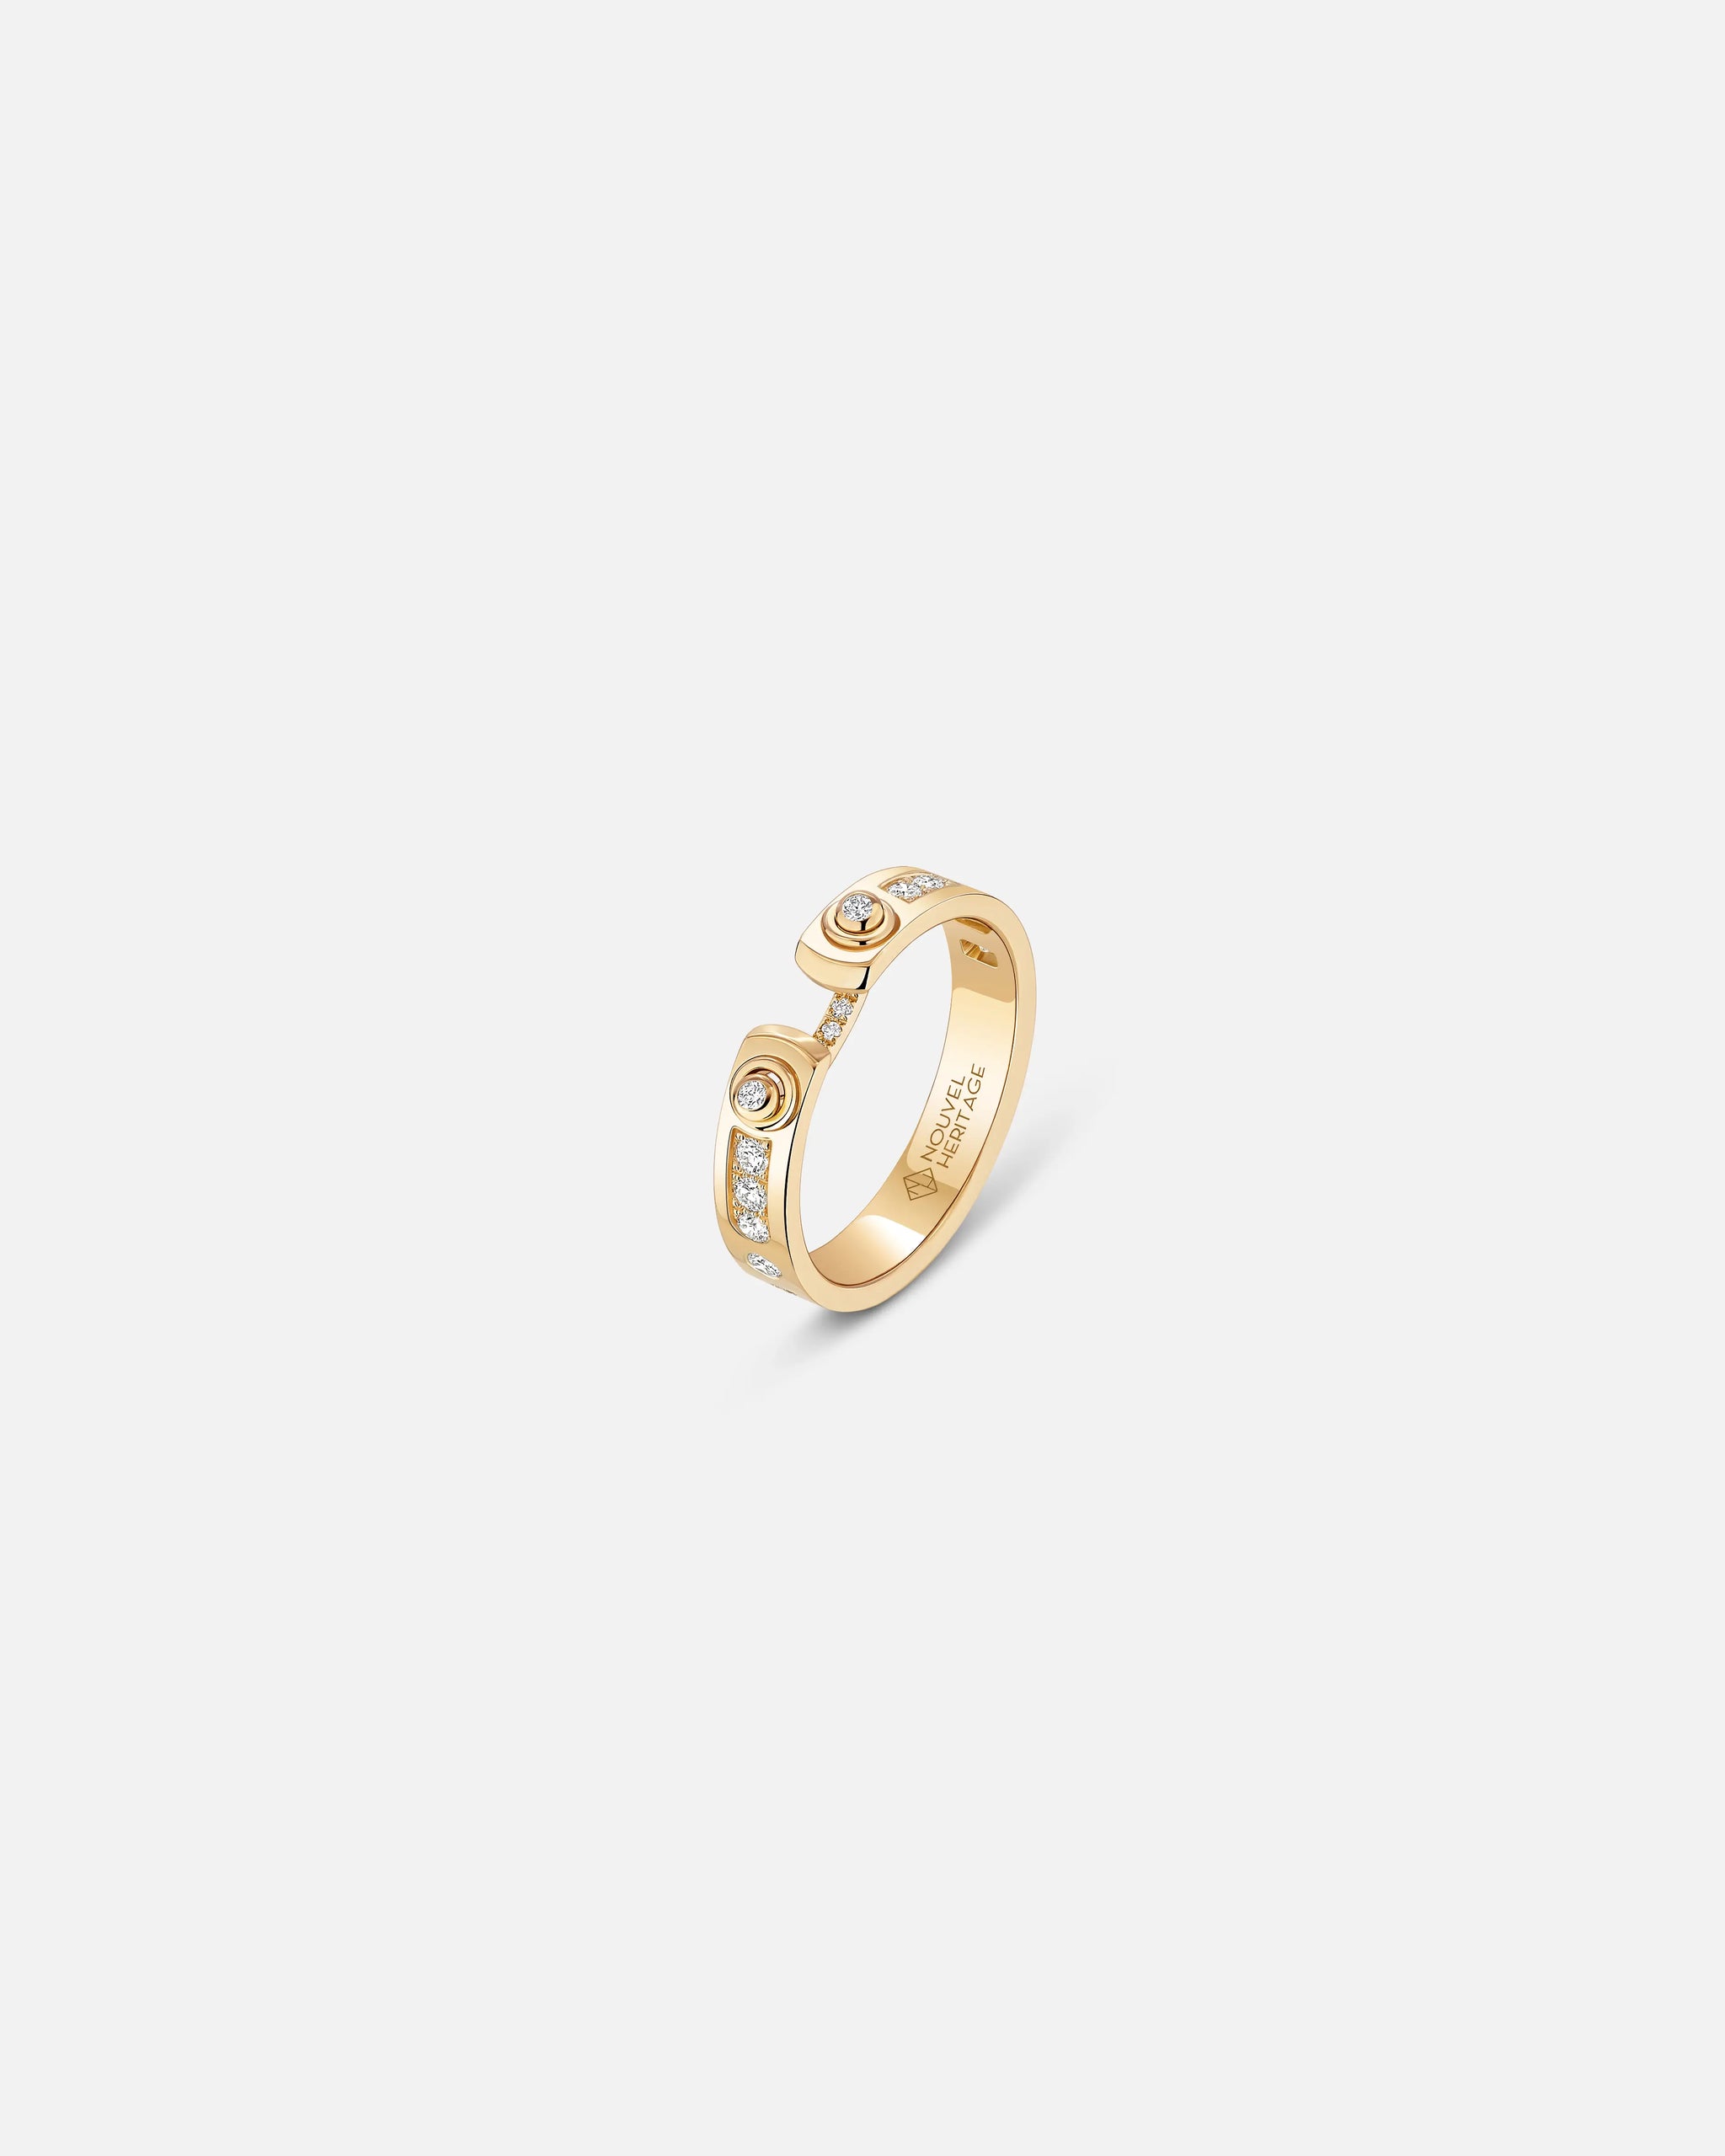 Tuxedo Mood Ring in Yellow Gold - 1 - Nouvel Heritage